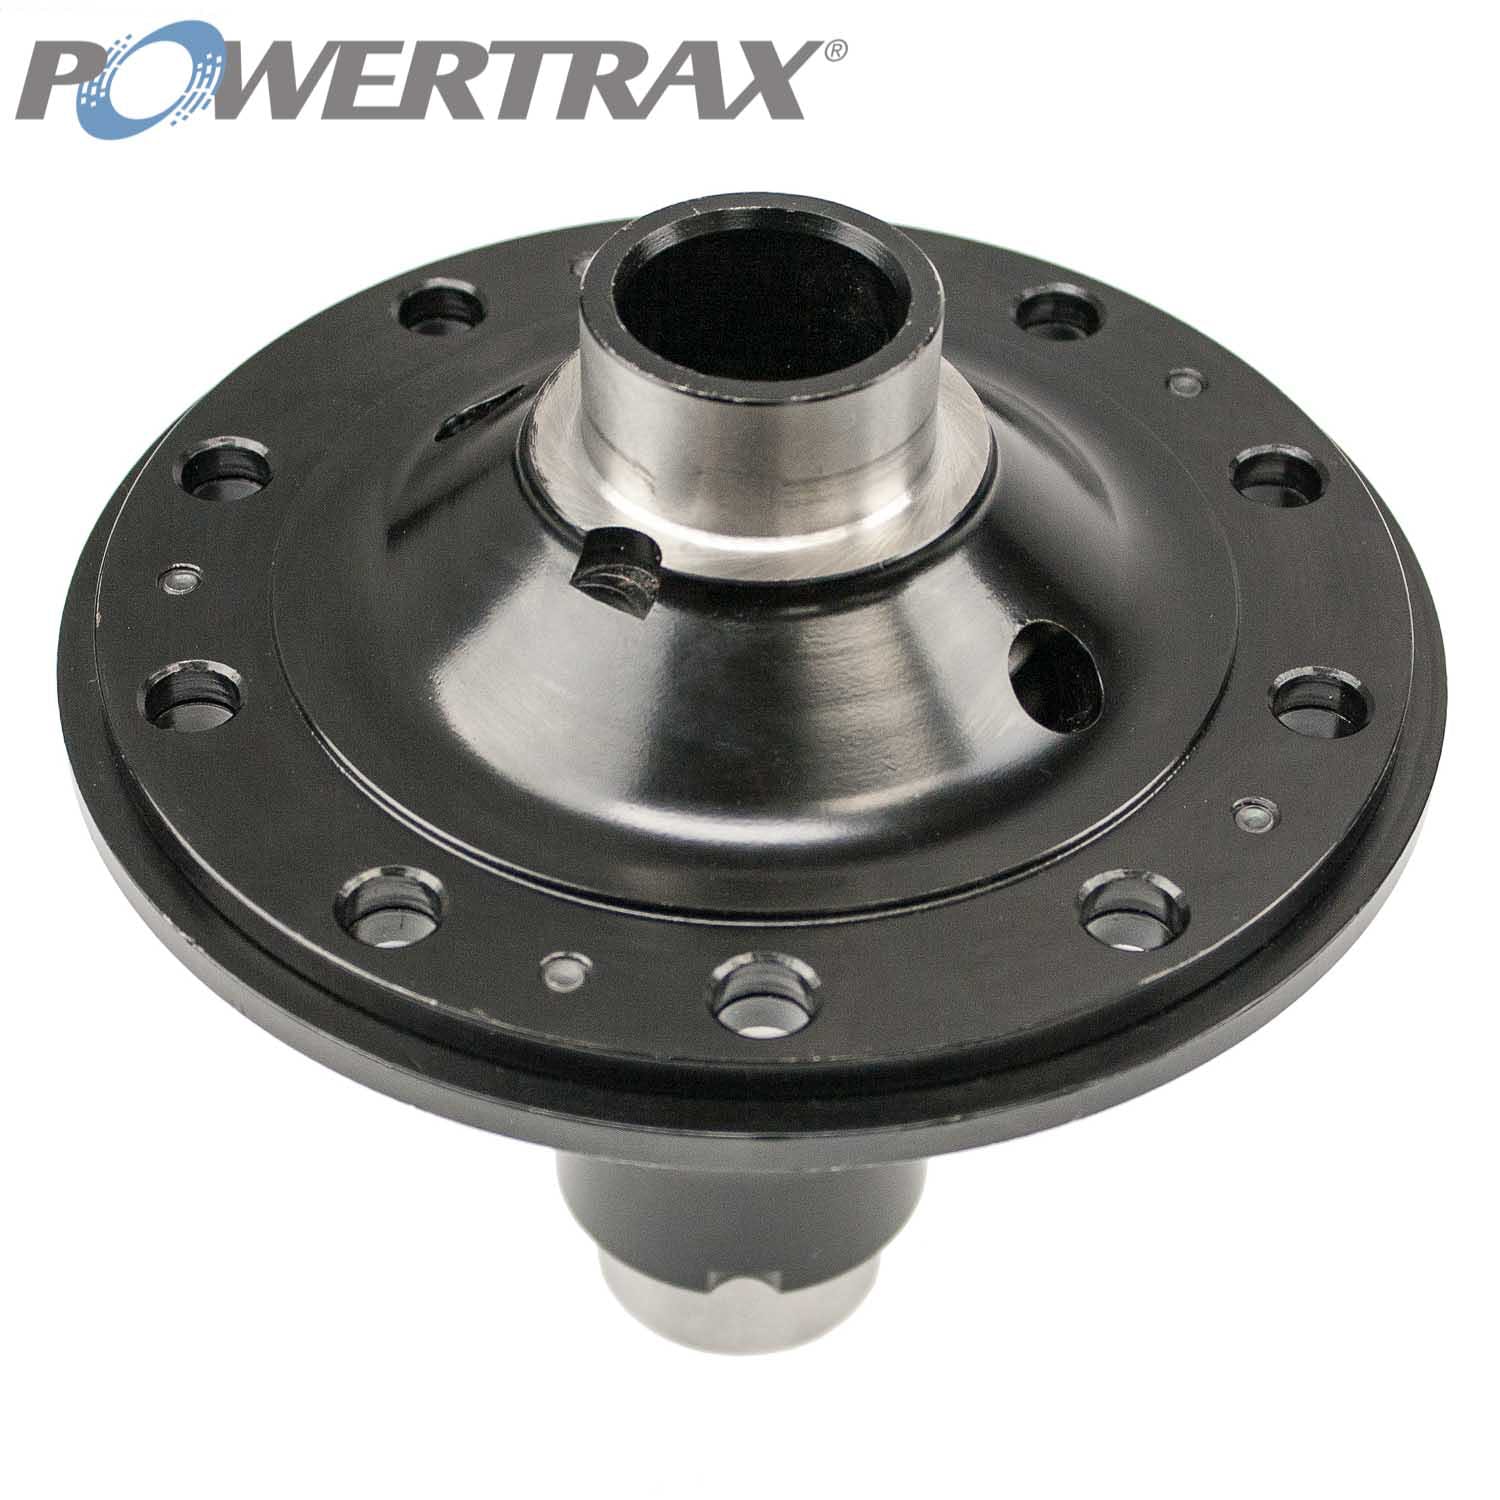 PowerTrax LK109028 Differential Lock Assembly